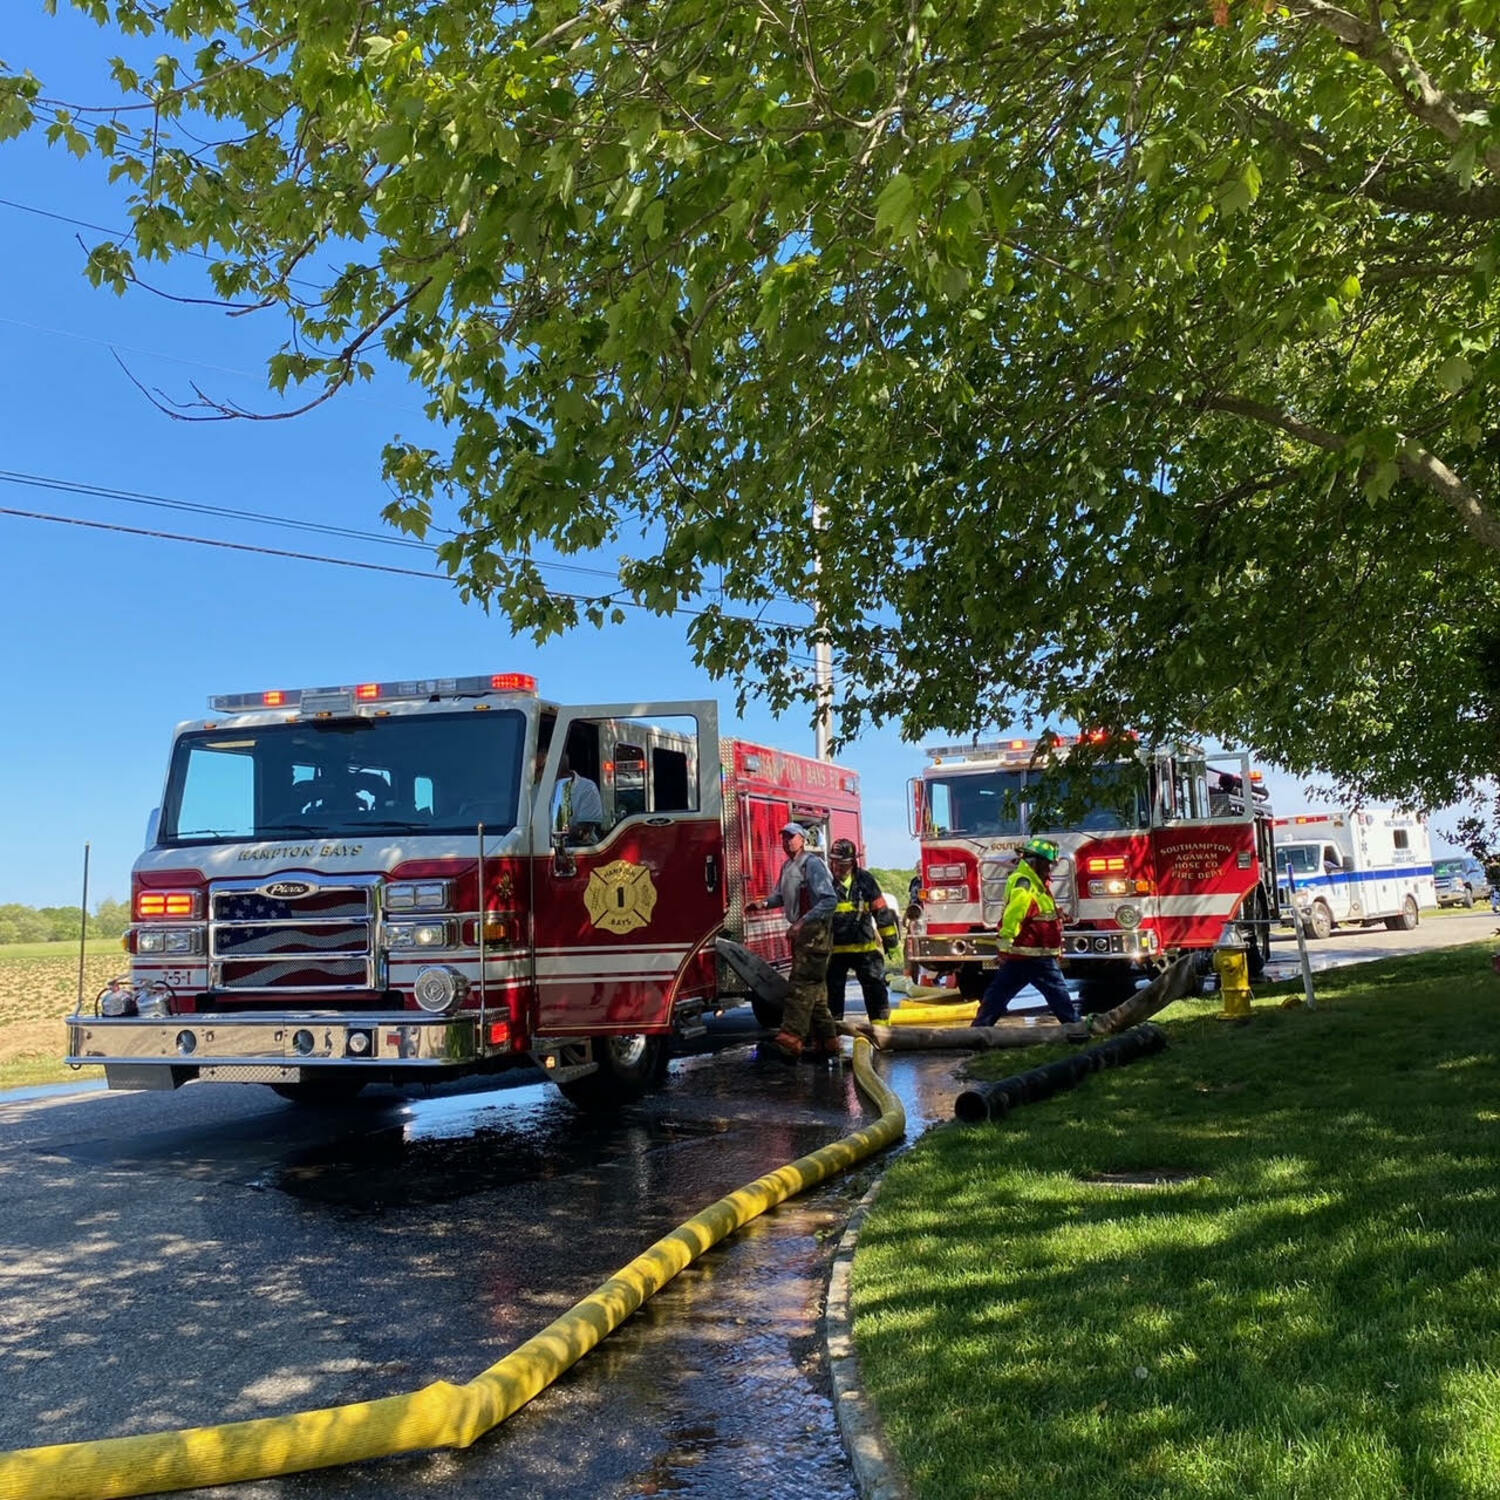 Volunteers from Hampton Bays Fire Department were among those who responded to the fire on Farmstead Lane in Water Mill on May 28.